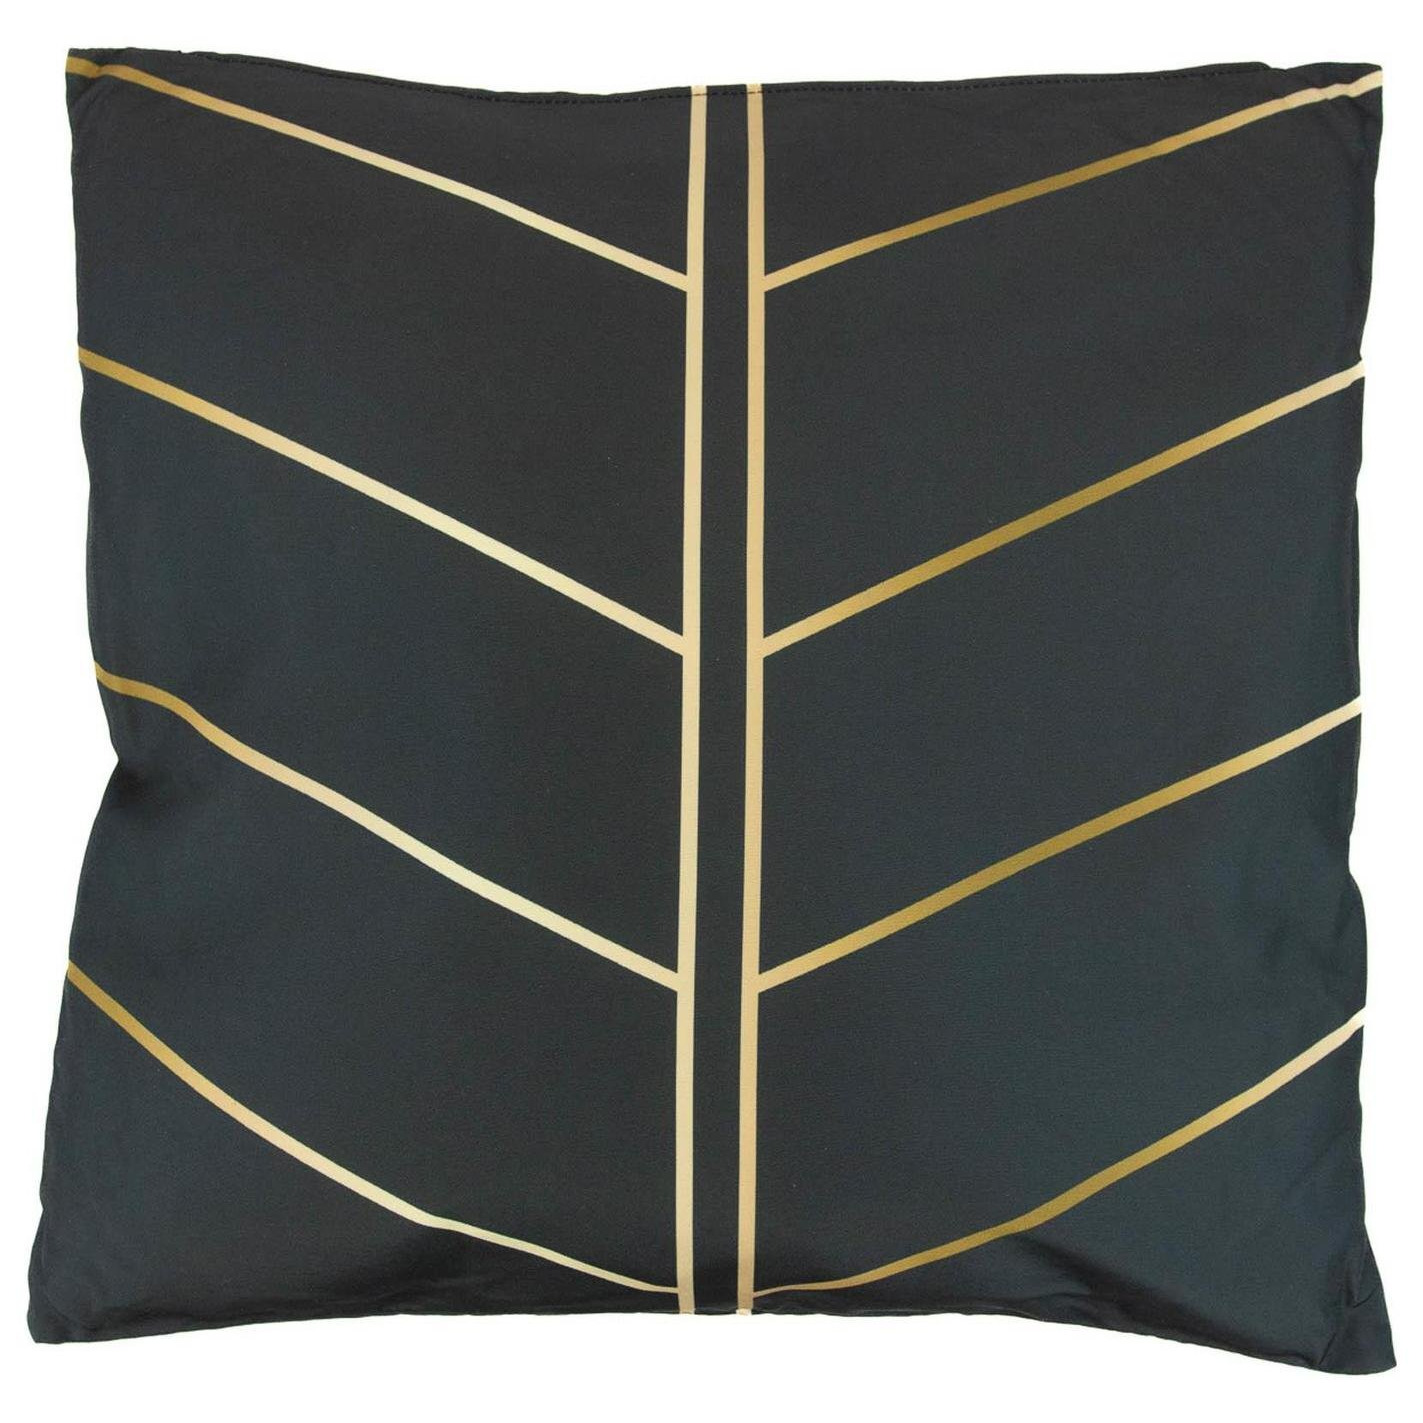 Streetwize Gold Palm Printed Outdoor Cushion - Pack of 4 - image 1